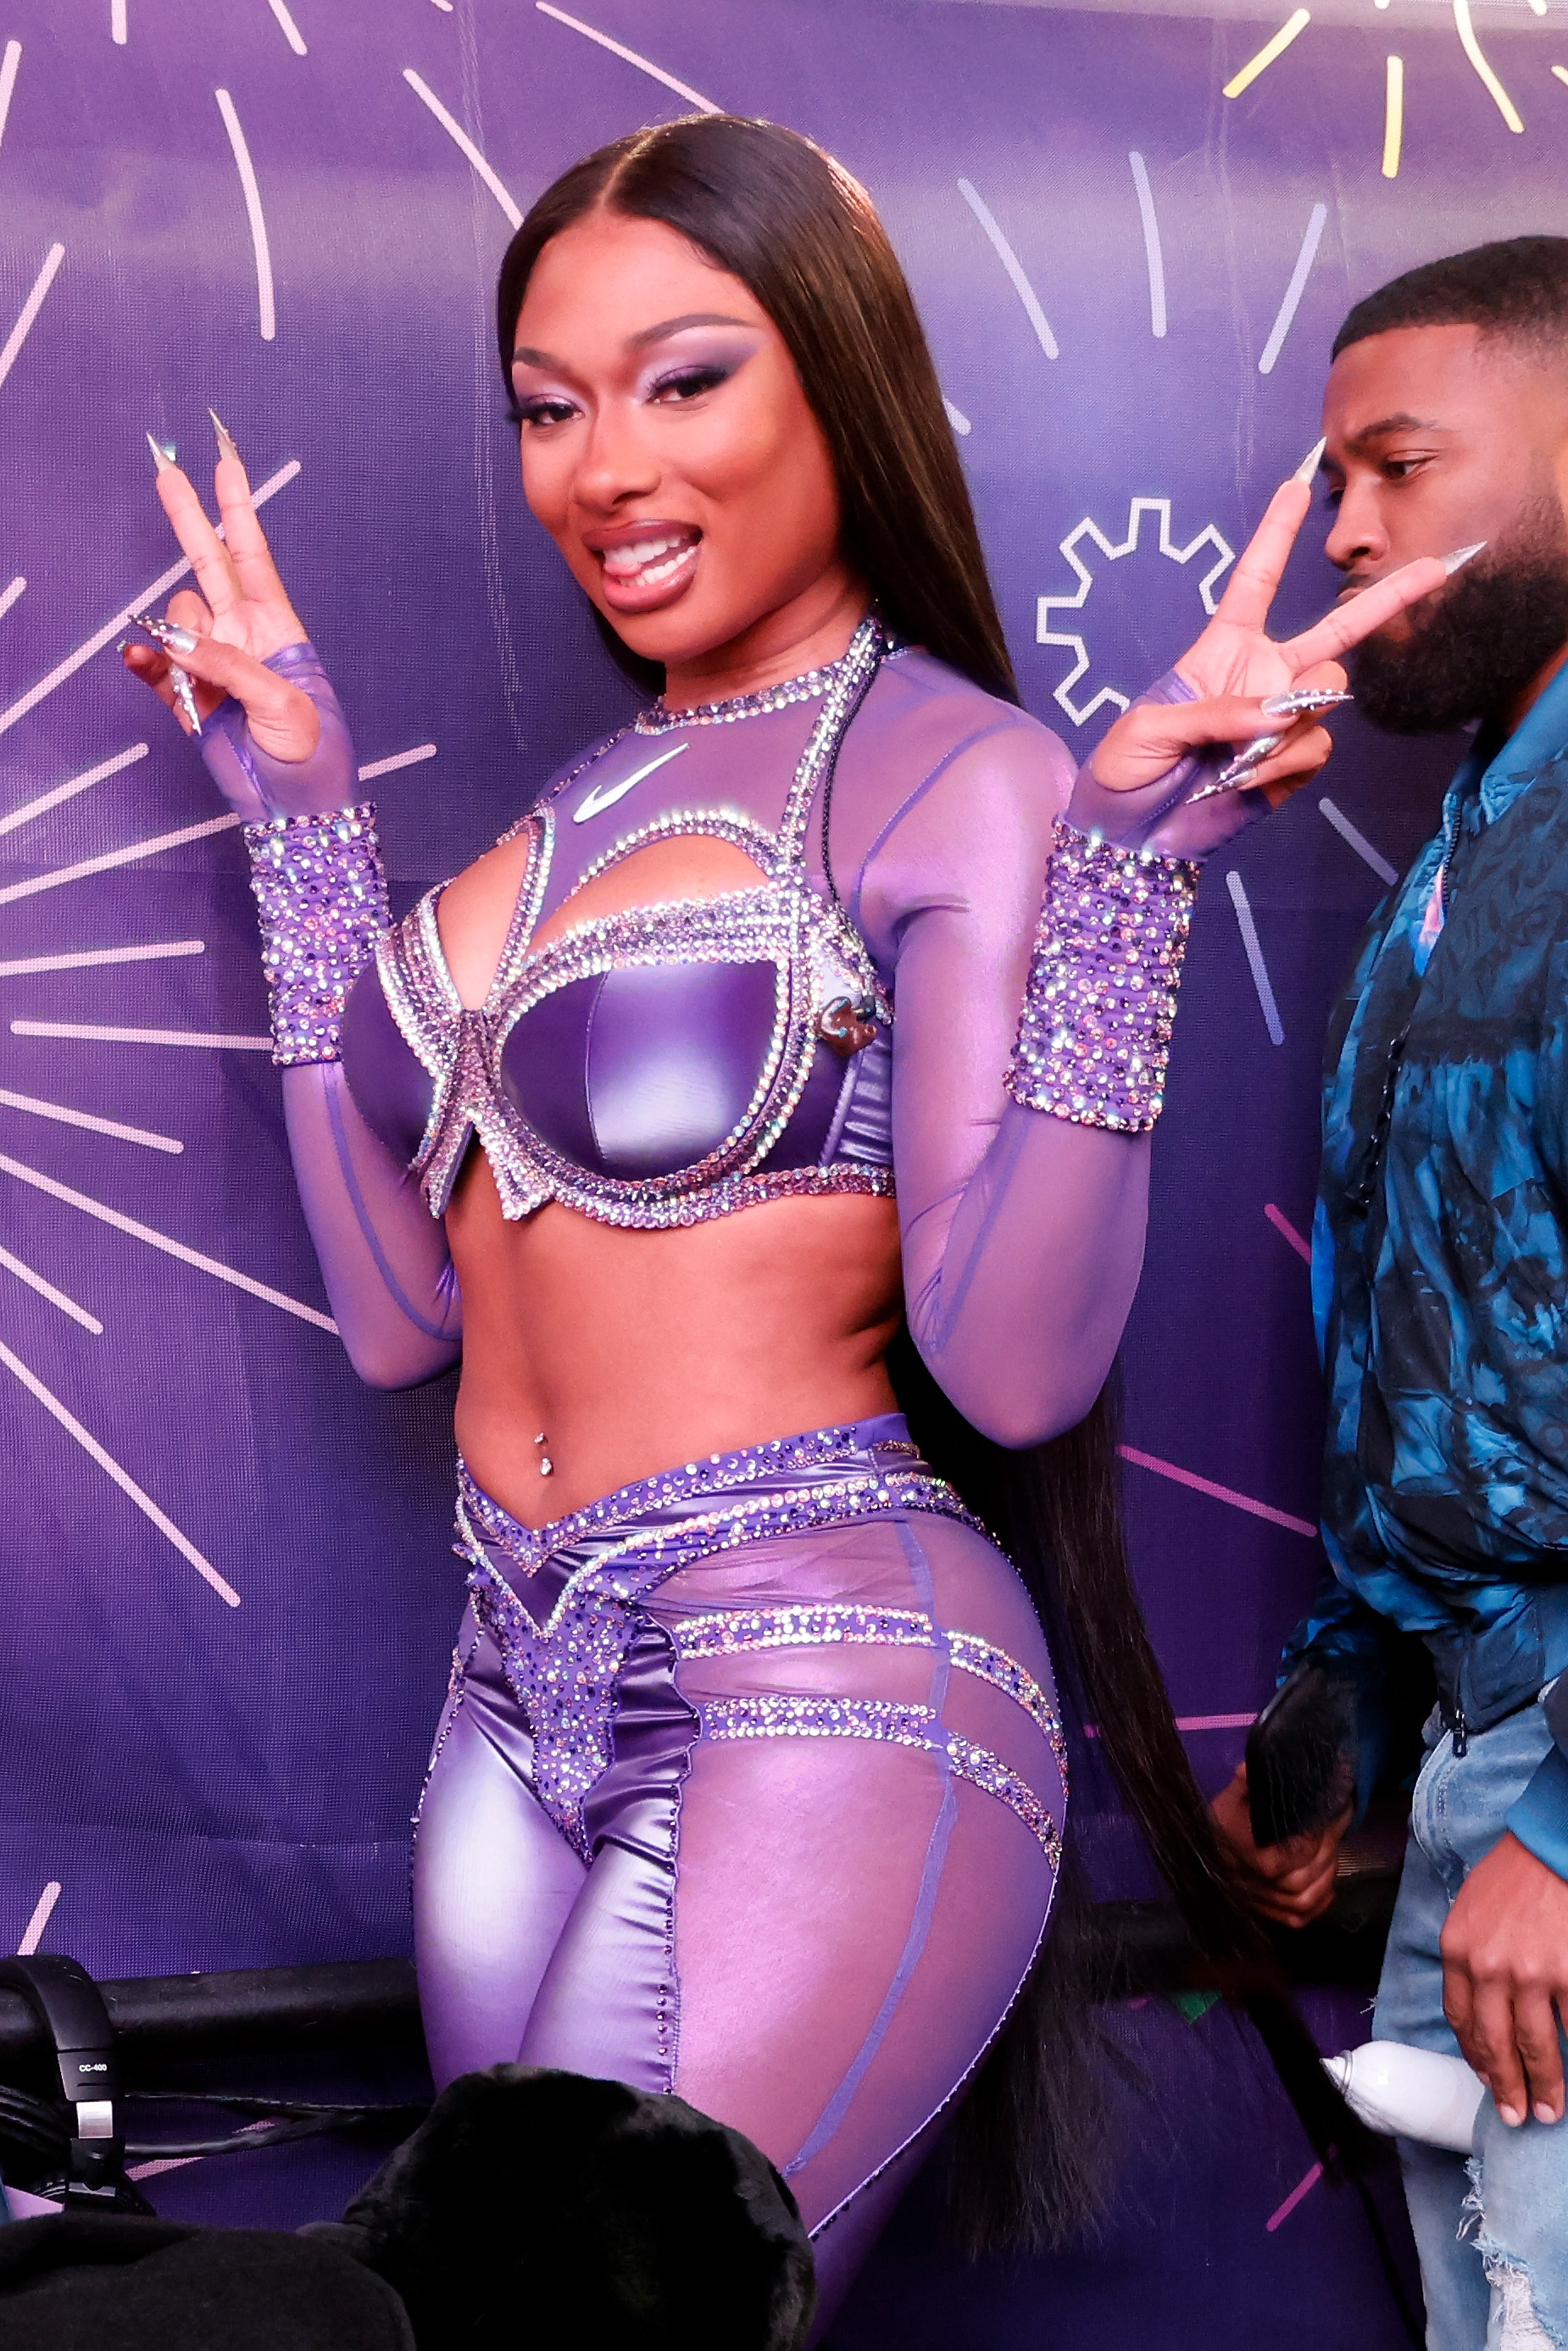 Megan Thee Stallion stunned in this sequin bralette and matching rhinestone-encrusted trousers for her New Year’s Eve show